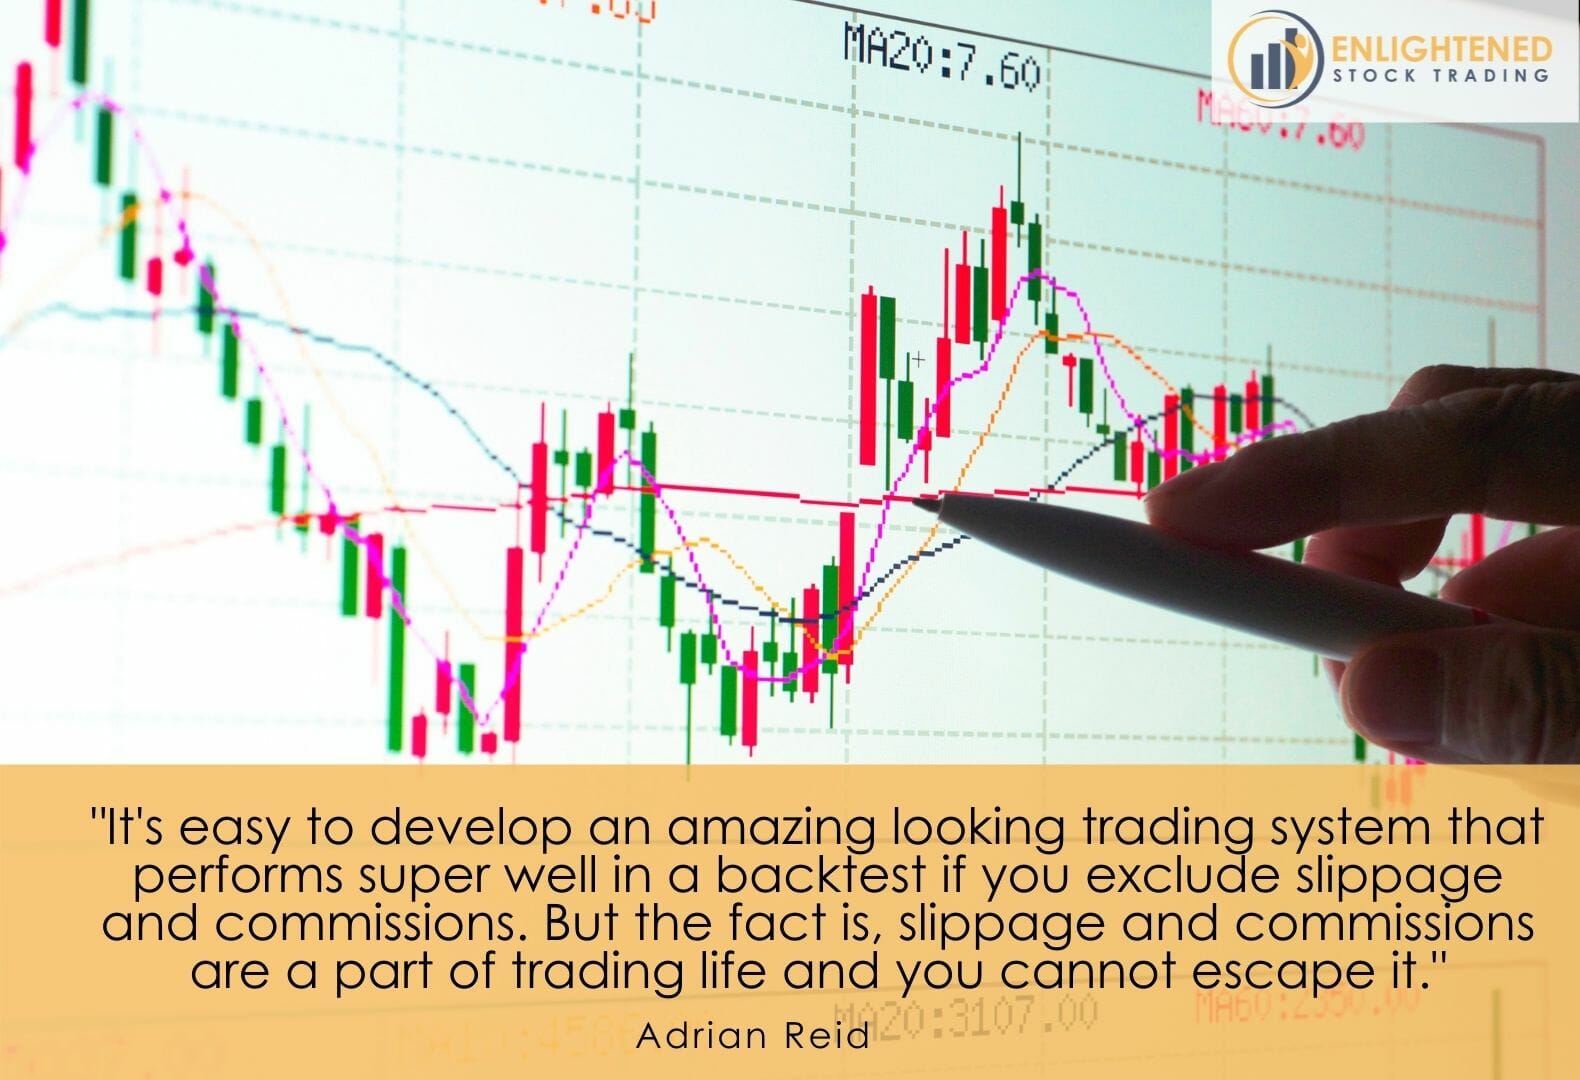 Backtest your trading system with slippage and commisison as they are unavoidable in real trading